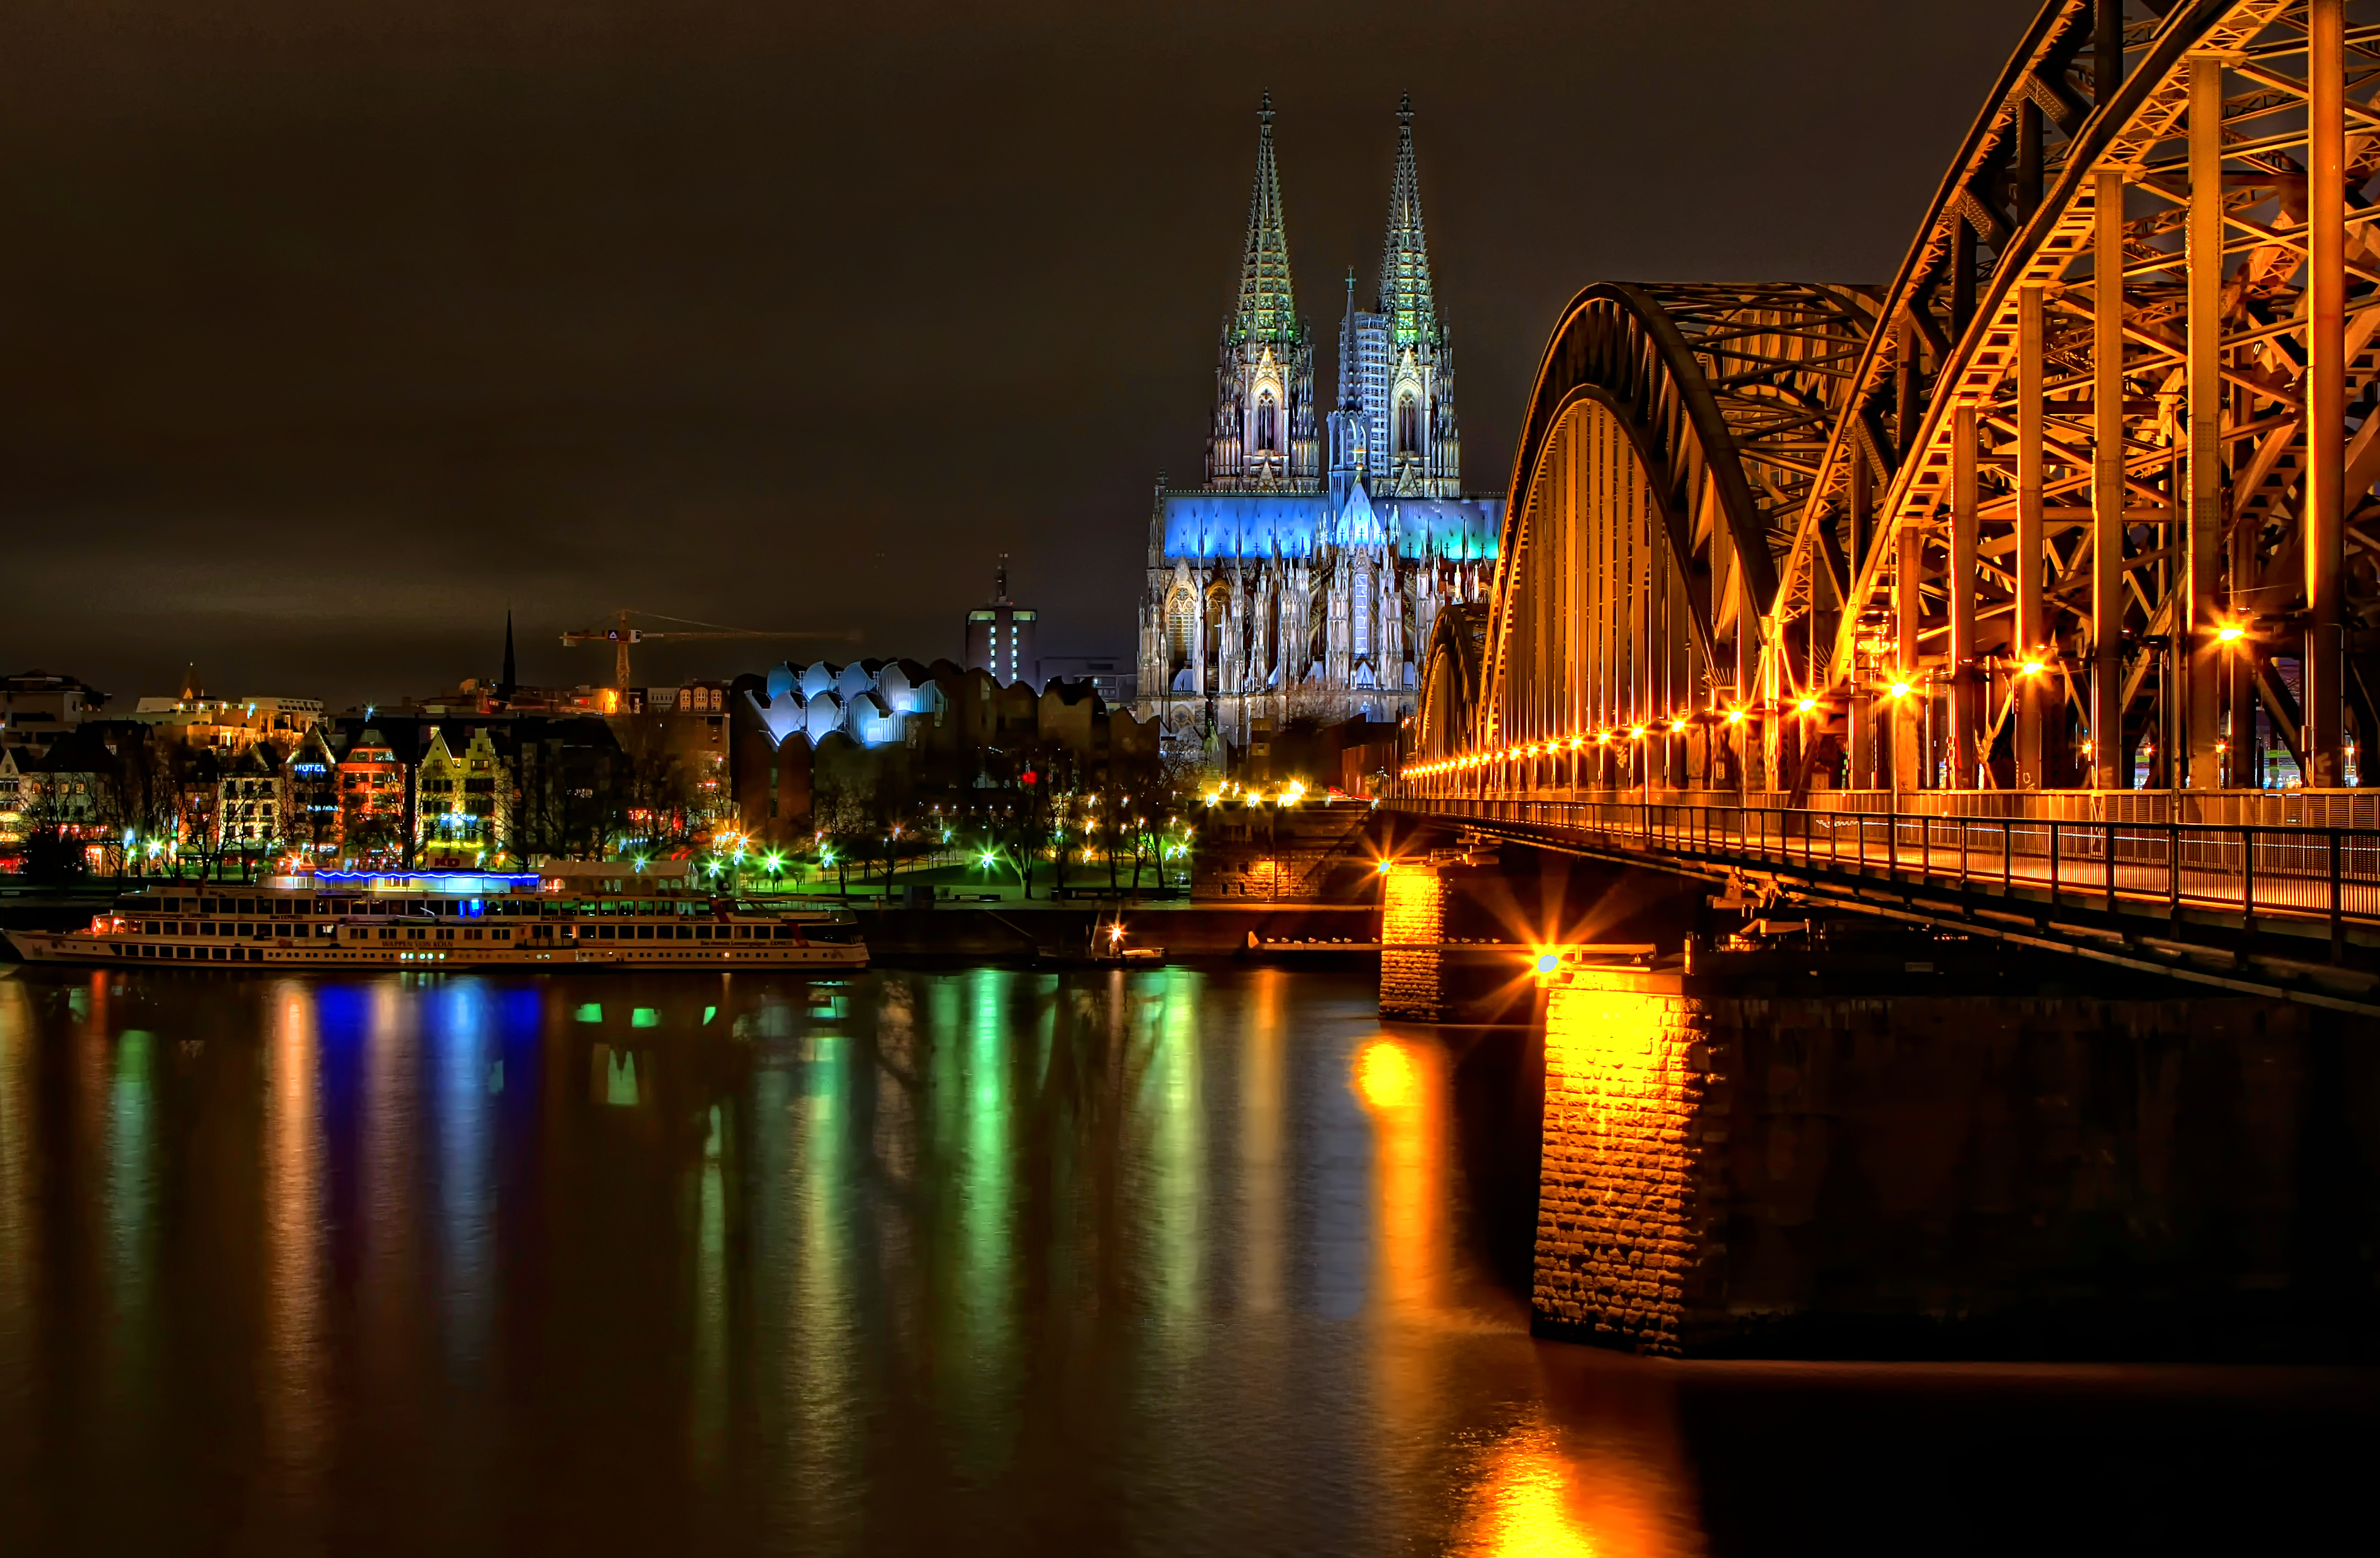 cologne, man made, cities wallpapers for tablet